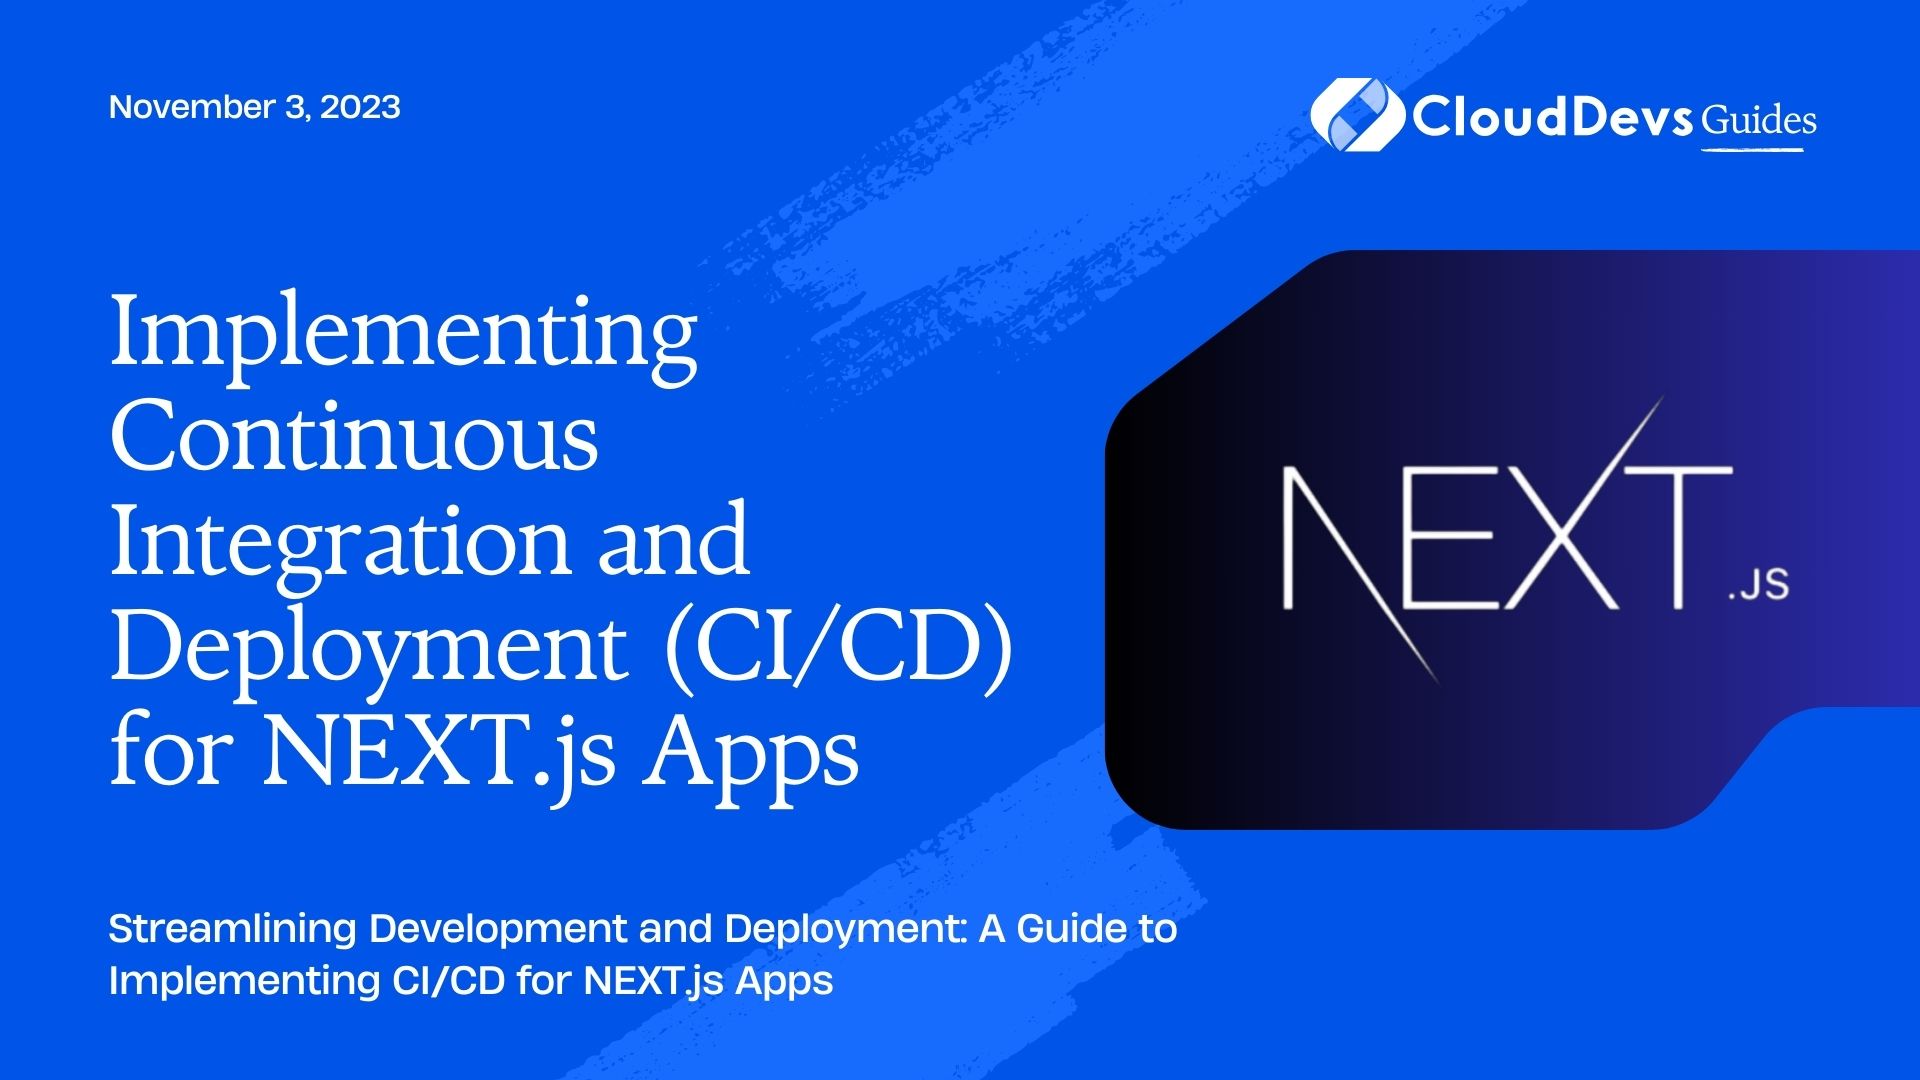 Implementing Continuous Integration and Deployment (CI/CD) for NEXT.js Apps